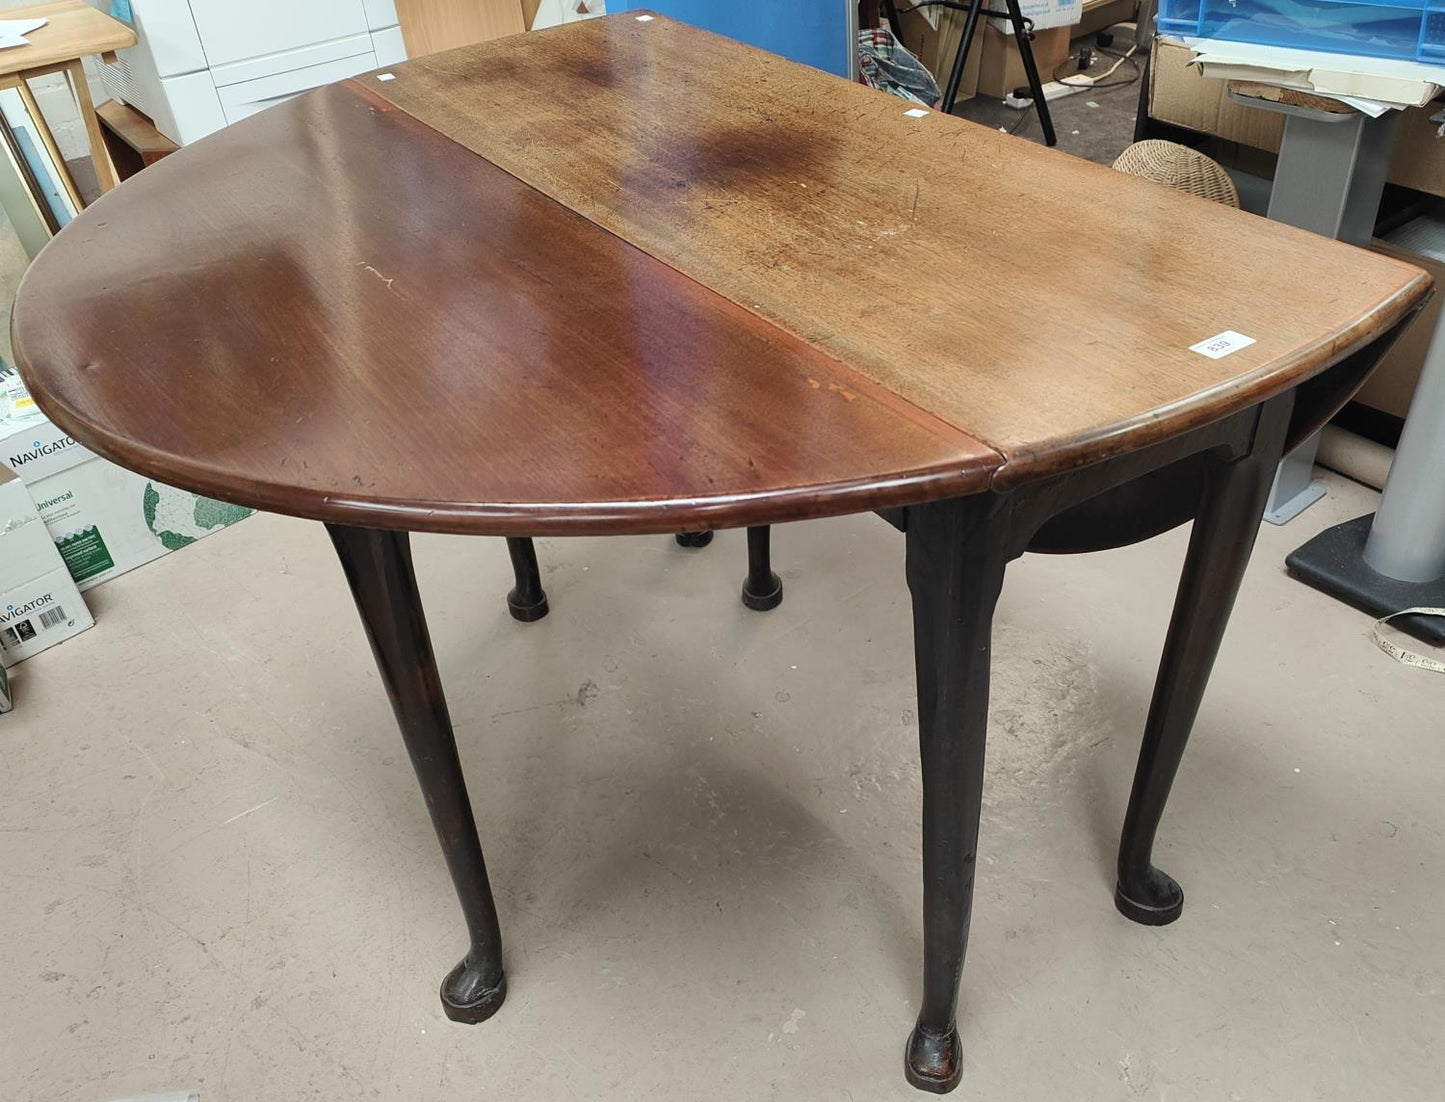 A mid 18th century mahogany dining table with oval drop leaf top